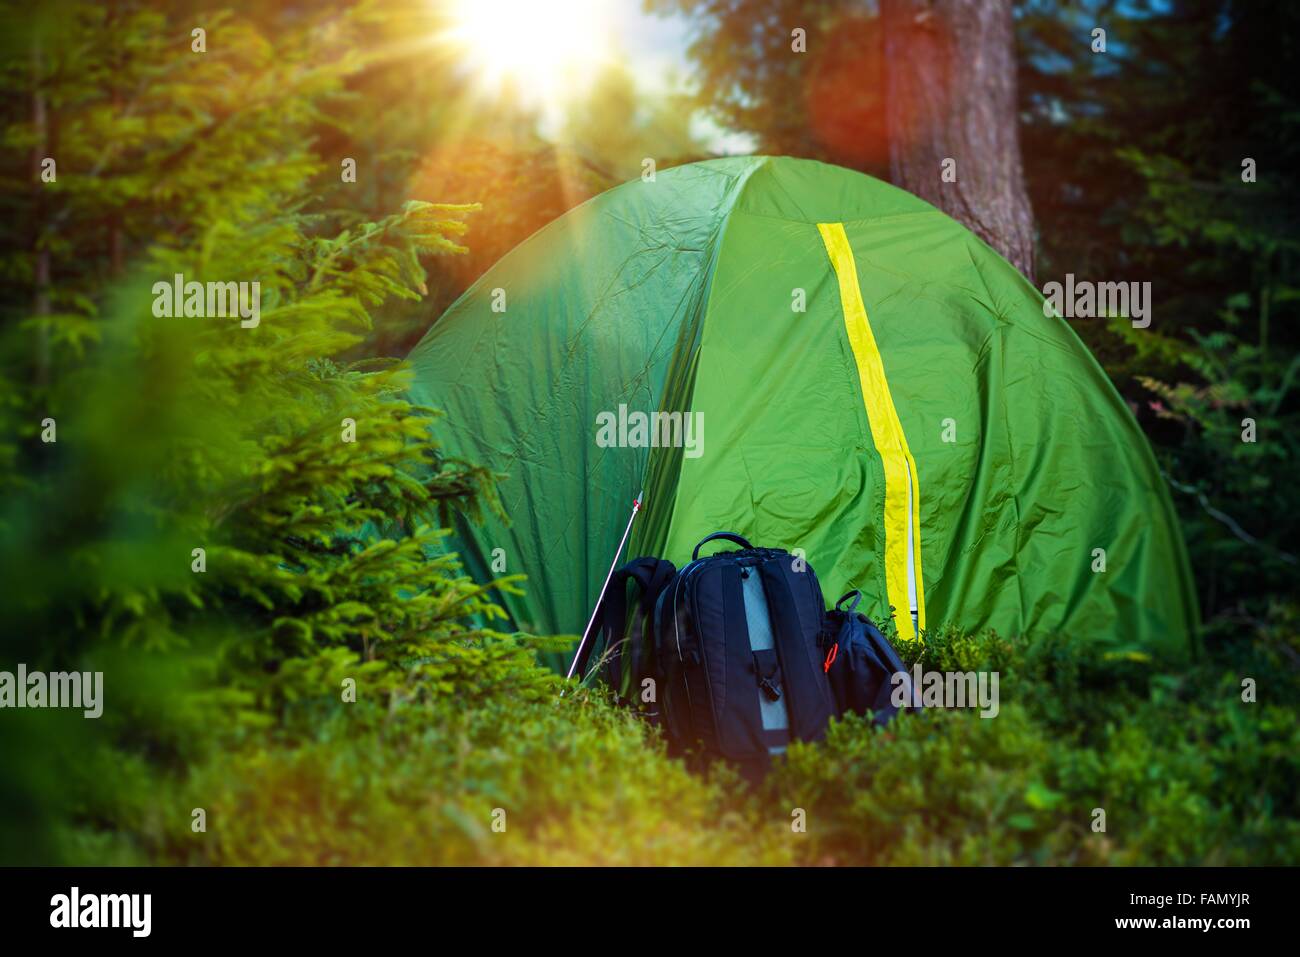 Small Double Green Tent Camping and Backpacks in the Forest. Summer Hiking and Camping. Stock Photo